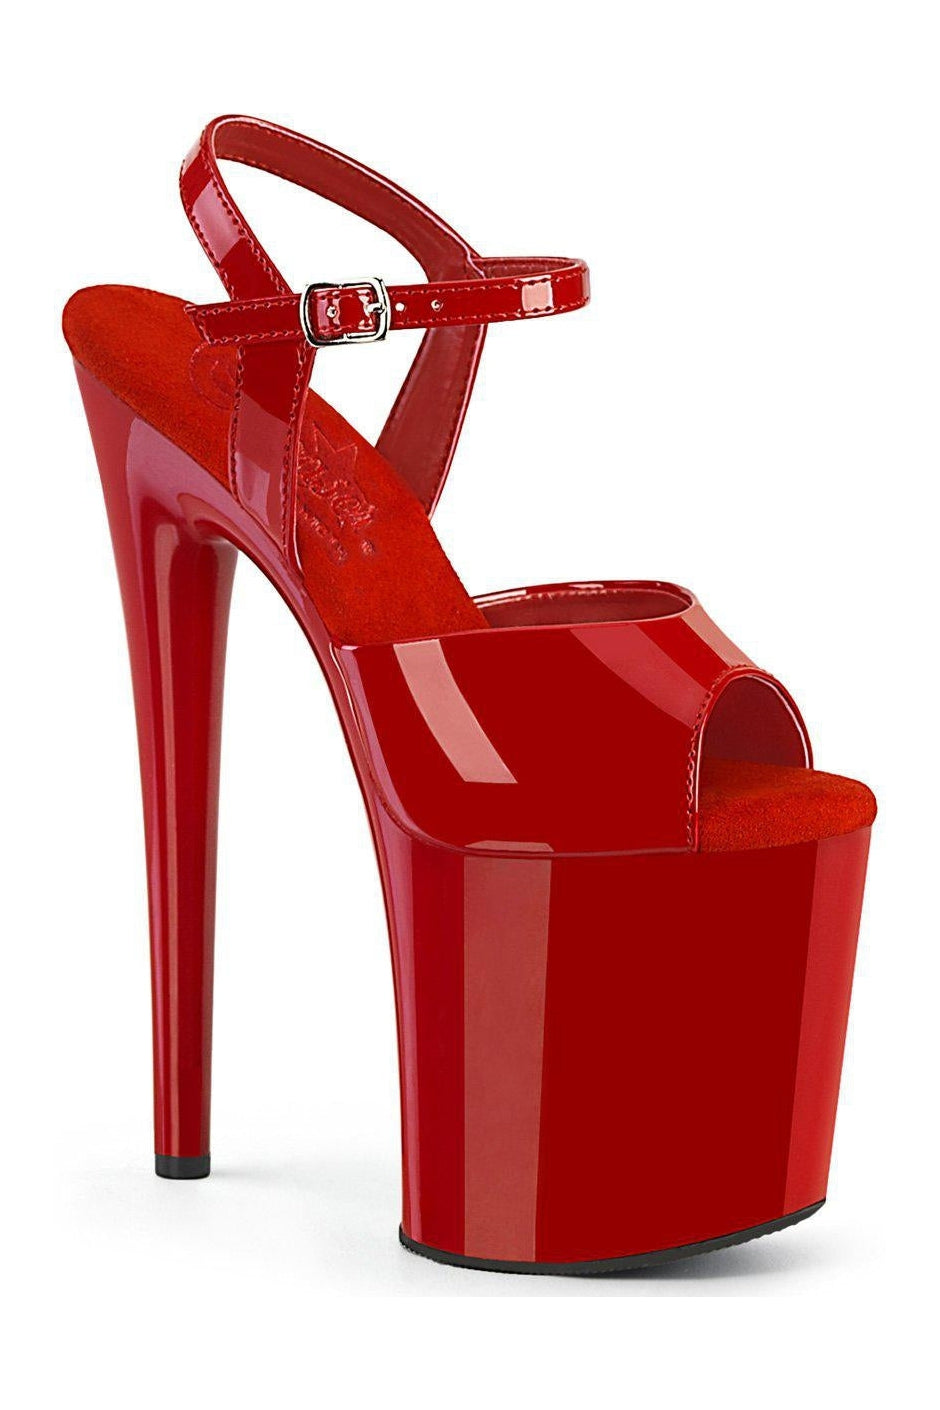 NAUGHTY-809 Sandal | Red Patent-Sandals-Pleaser-Red-11-Patent-SEXYSHOES.COM